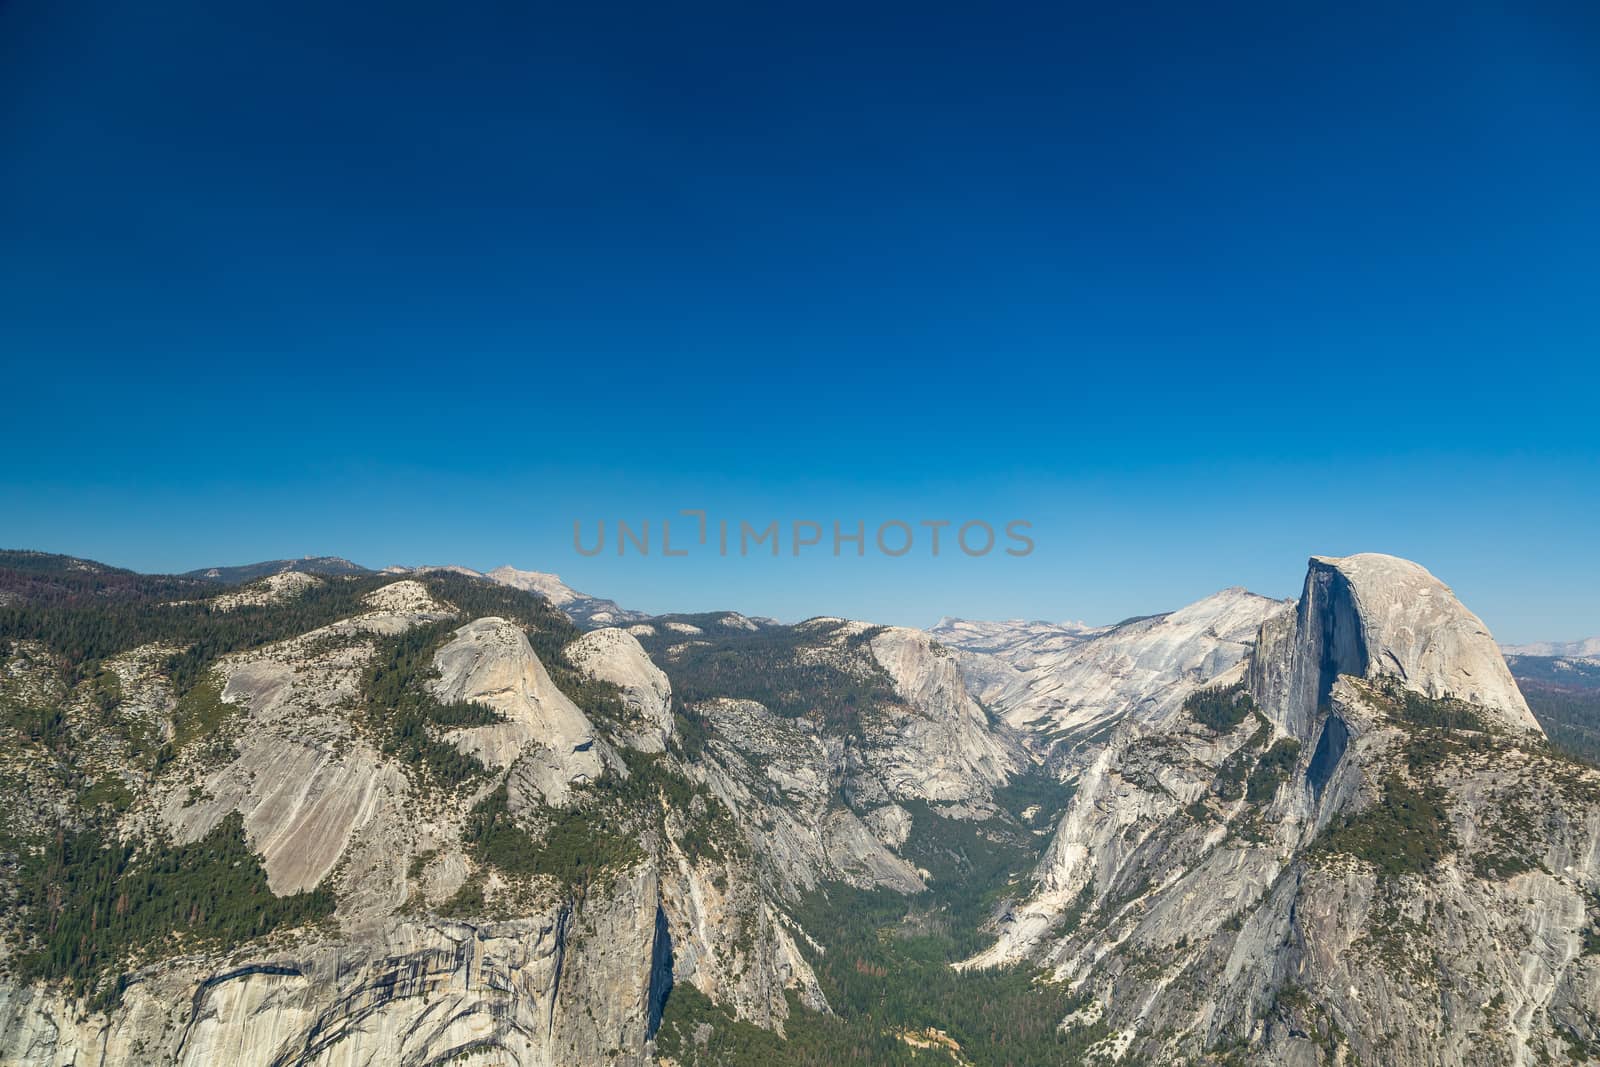 Glacier Point View by adifferentbrian